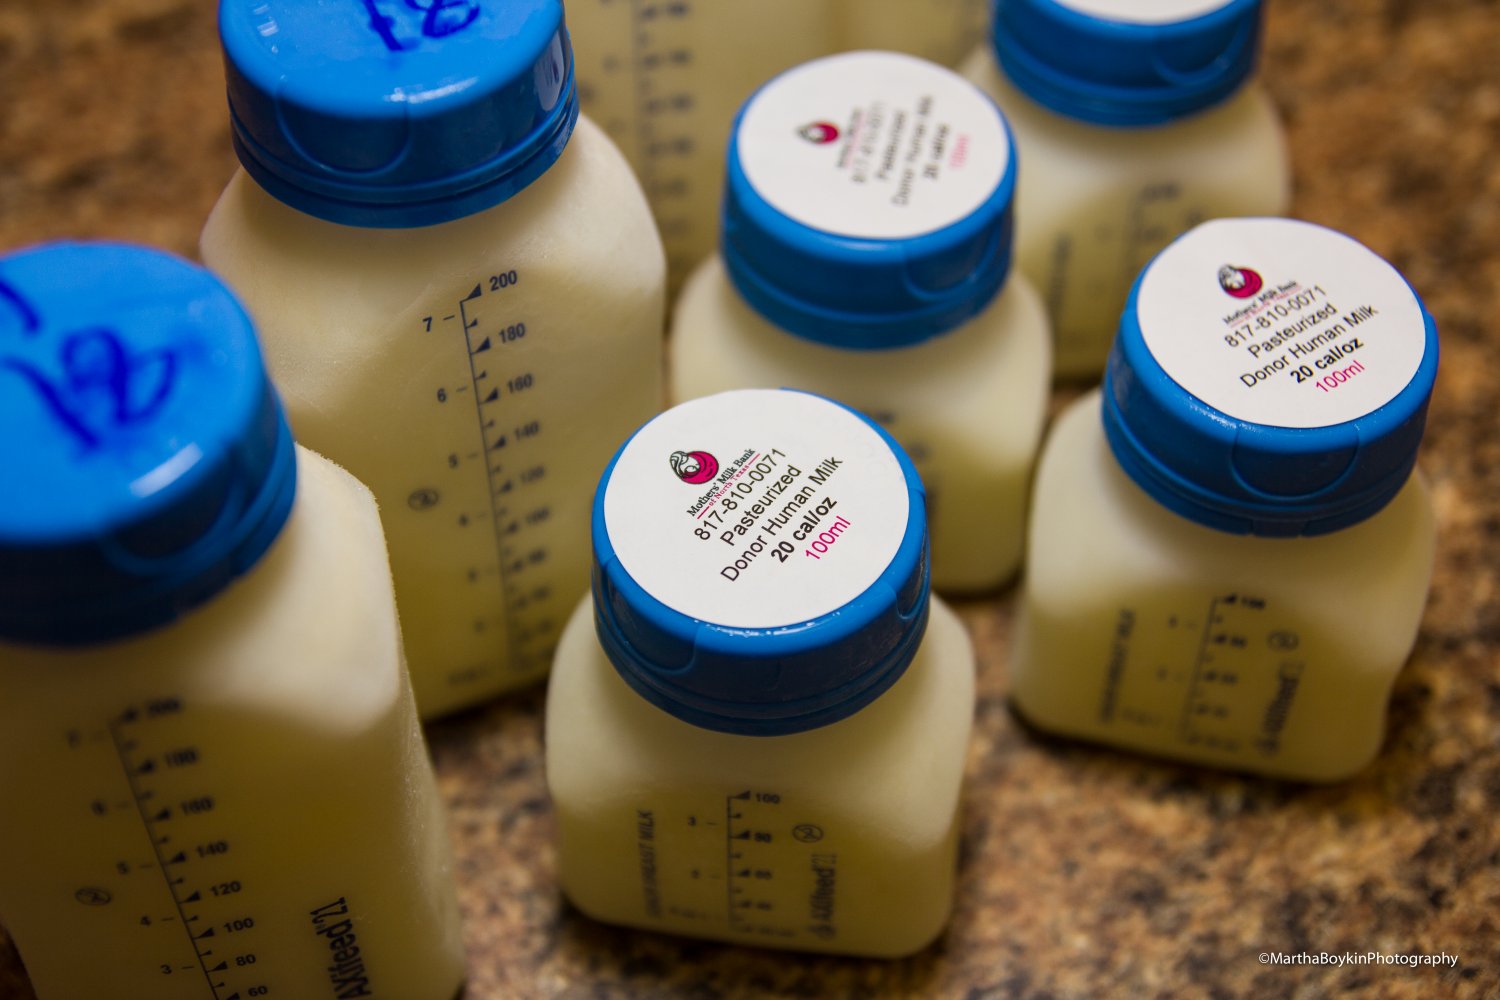 100mL and 200mL bottles of pasteurized donor human milk